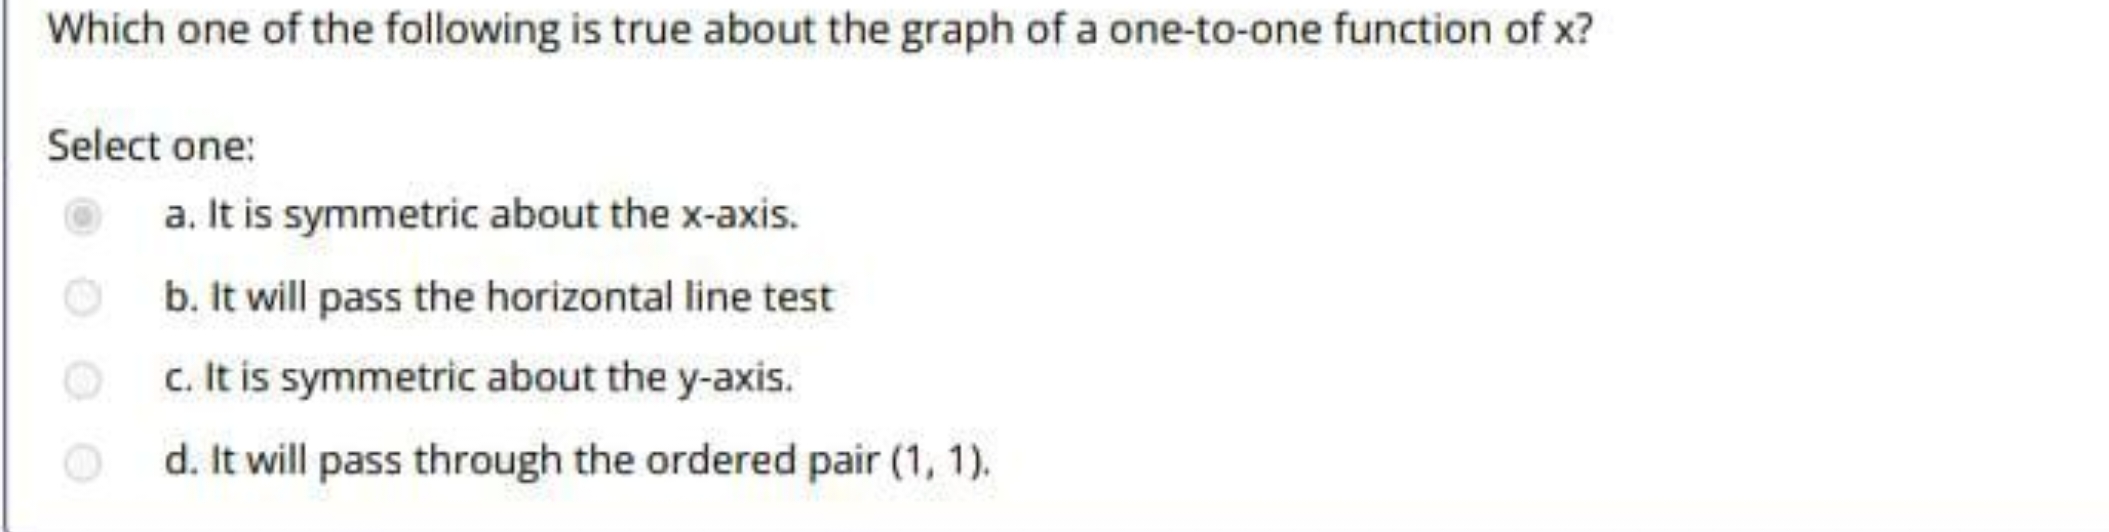 Which one of the following is true about the graph of a one-to-one fun